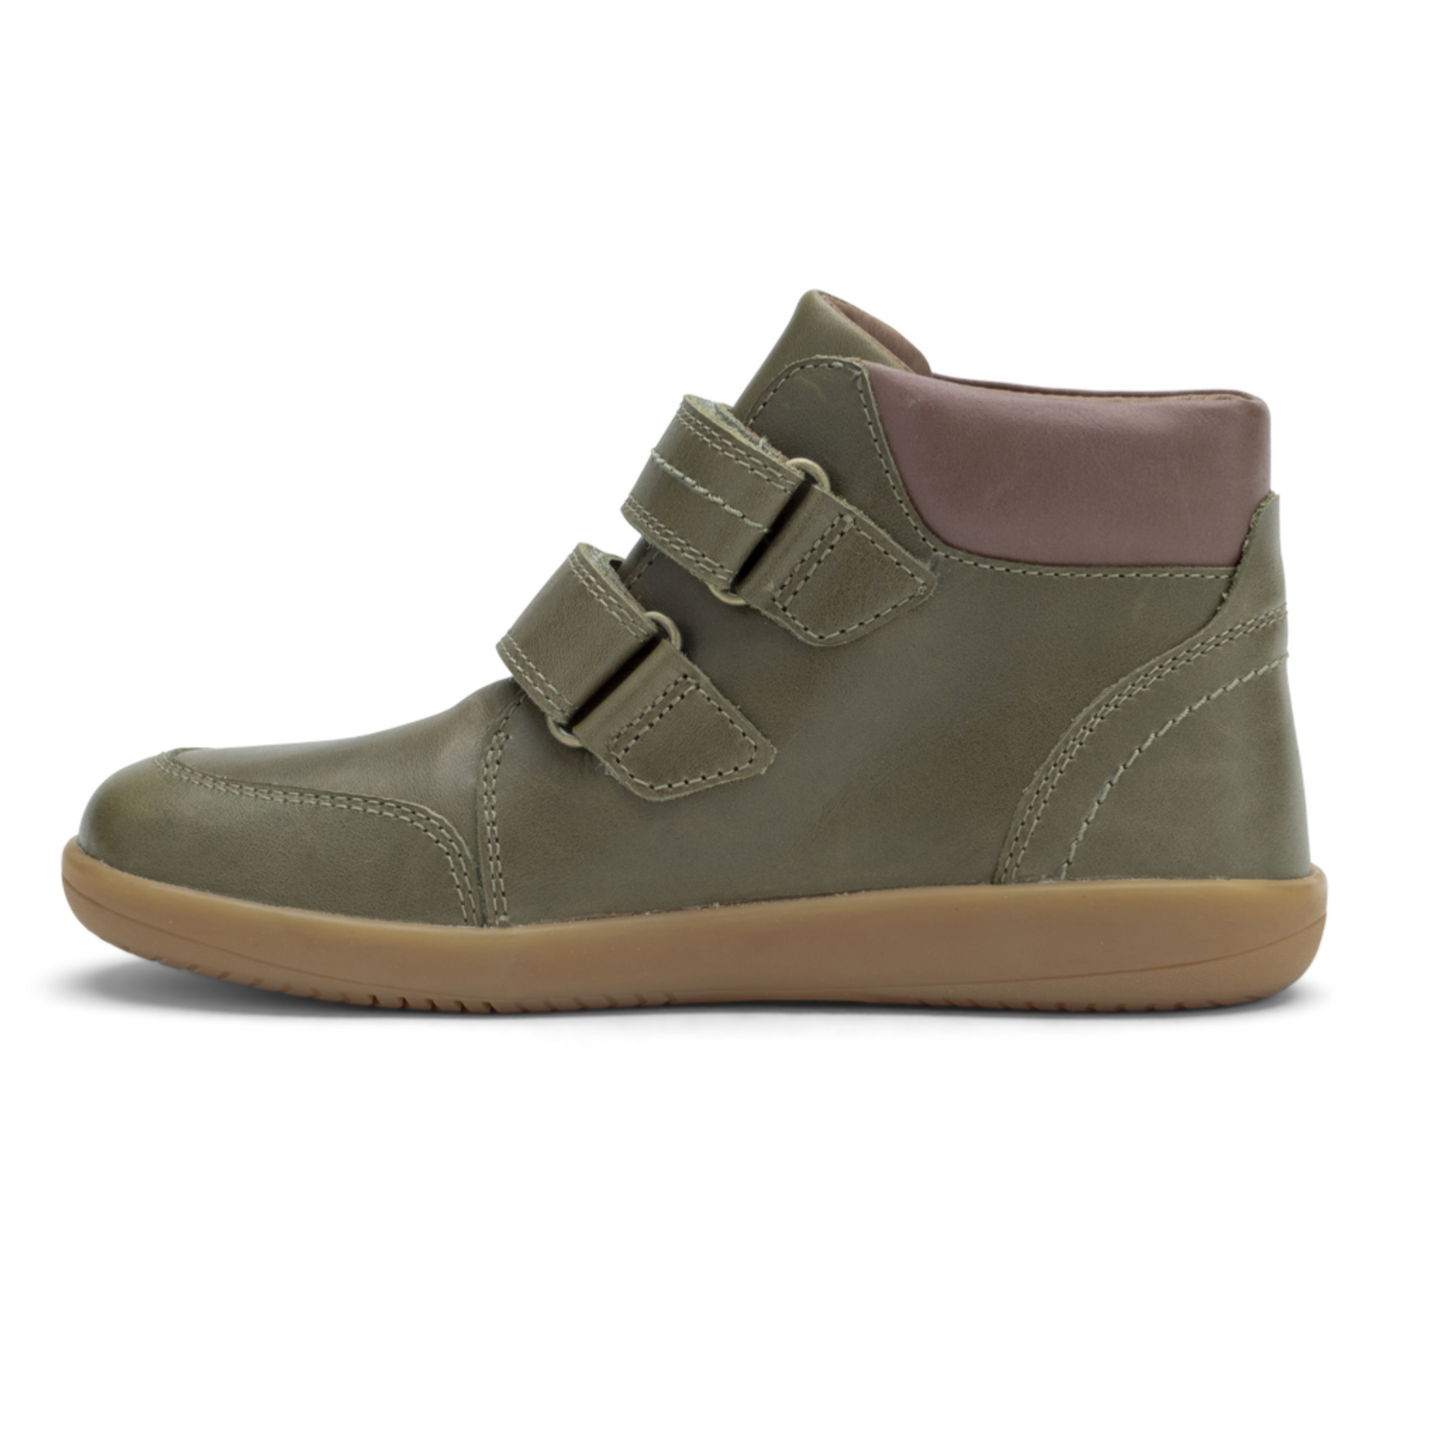 Bobux Timber Olive Boots